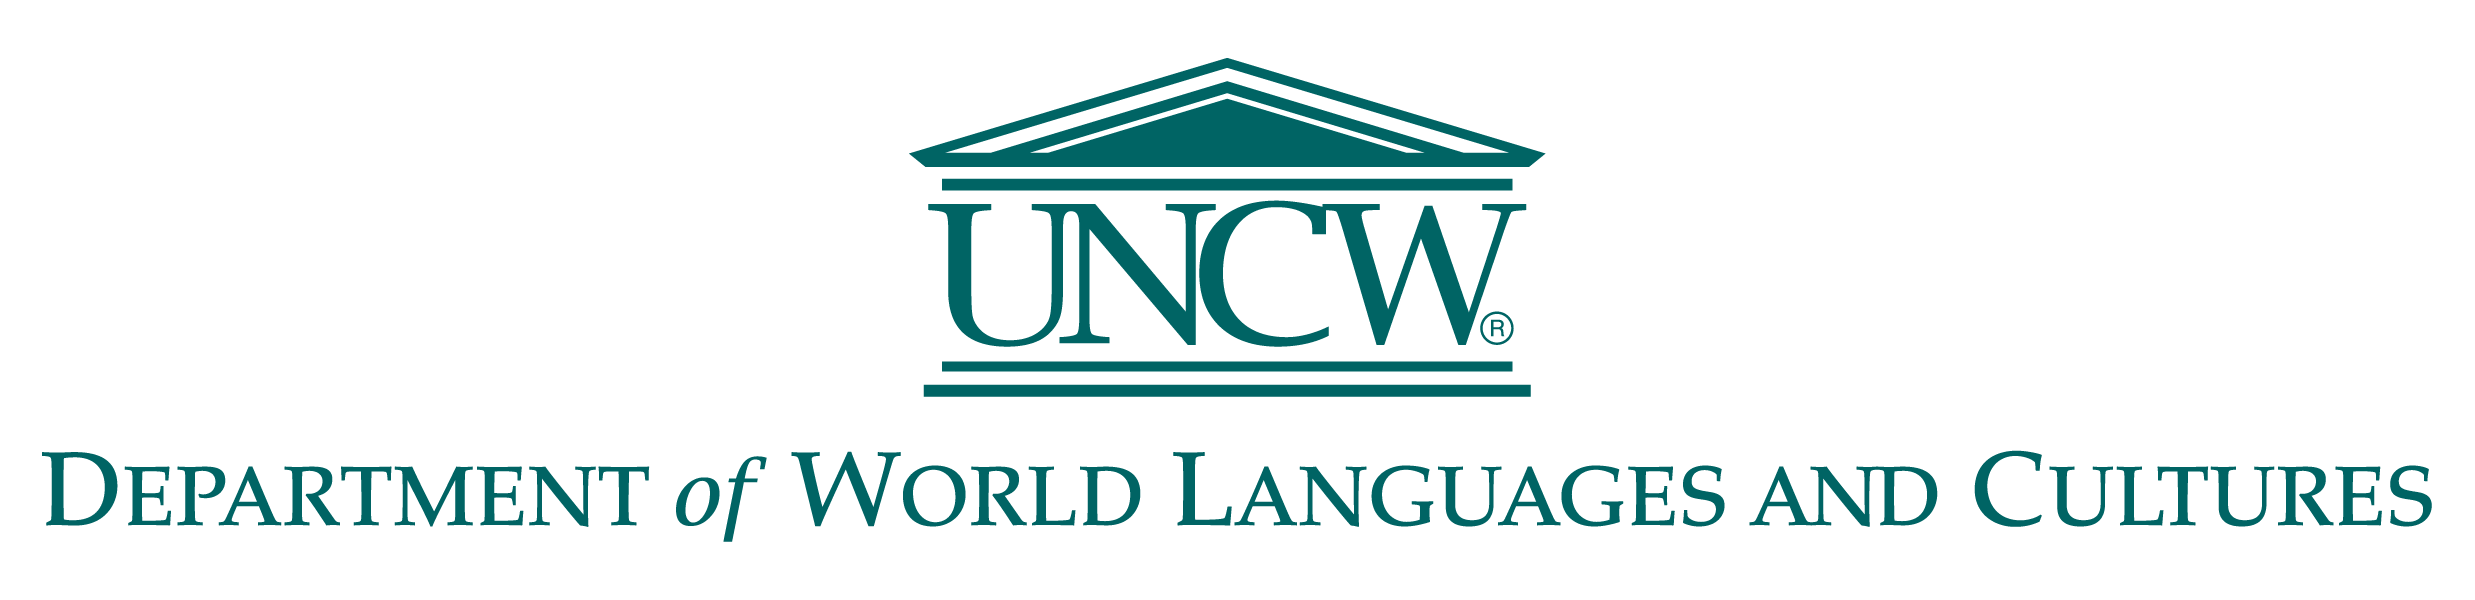 UNCW Department of World Language and Culture 